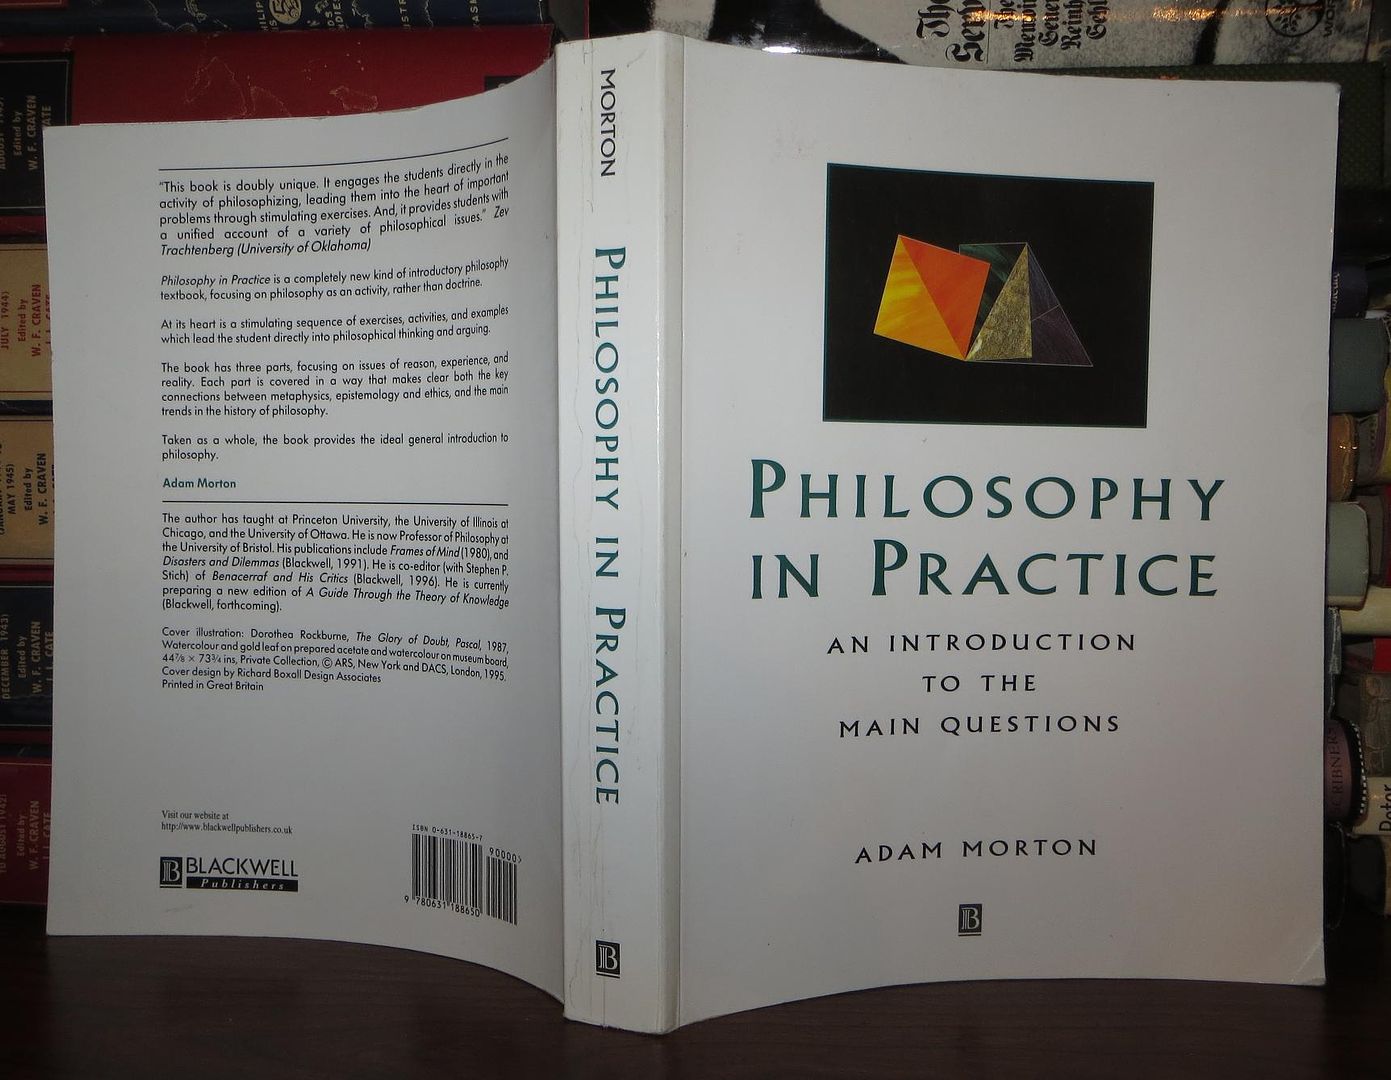 MORTON, ADAM - Philosophy in Practice an Introduction to the Main Questions